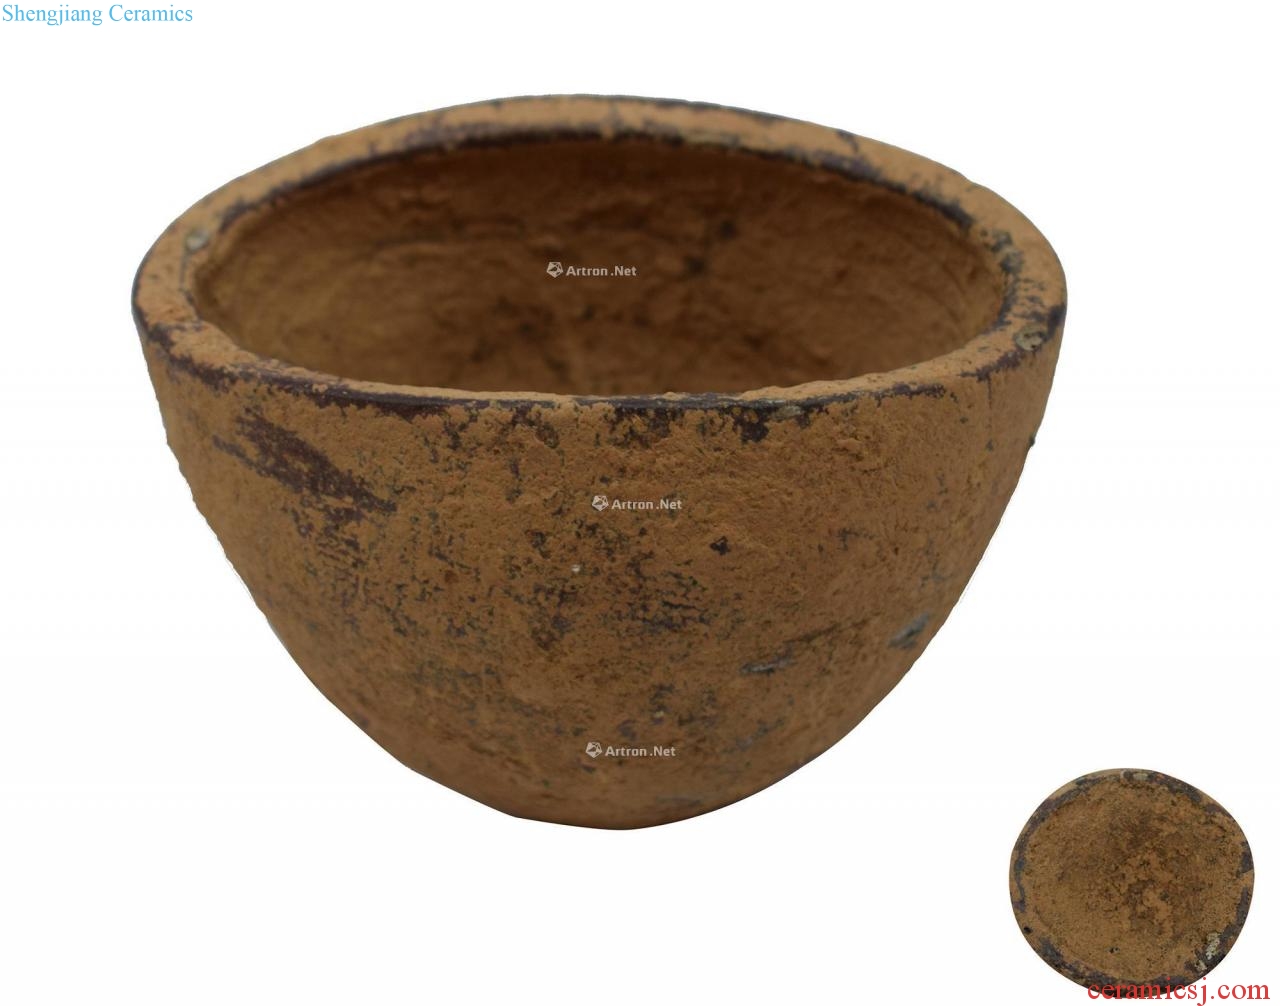 Shang dynasty pottery bowl (a)